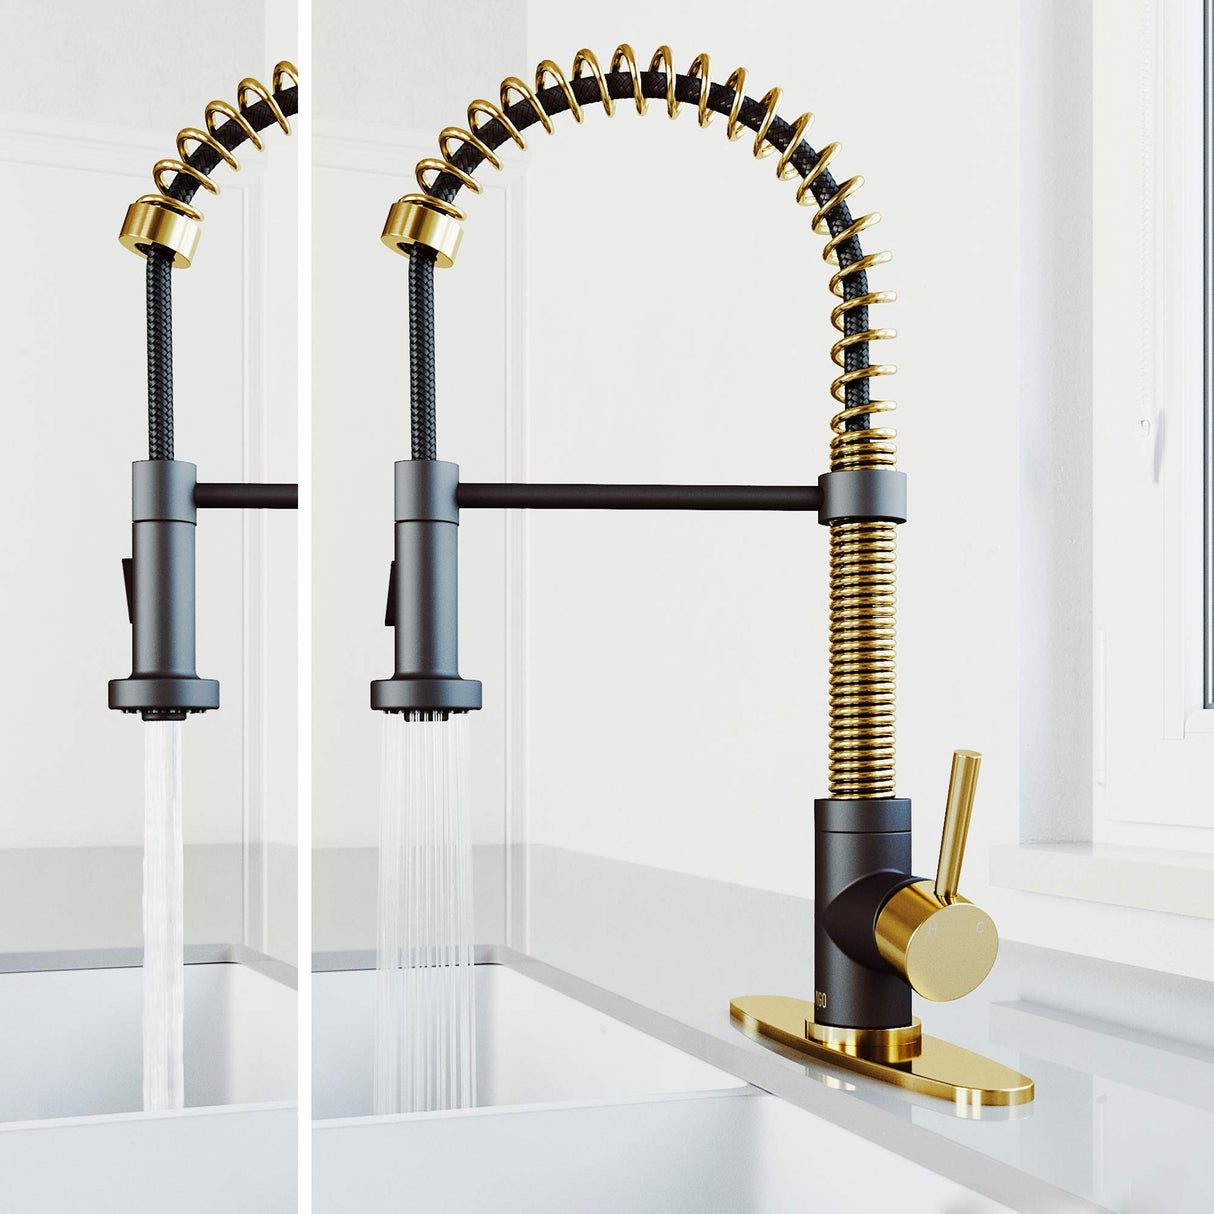 VIGO VG02001MGMBK1 19" H Edison Single-Handle with Pull-Down Sprayer Kitchen Faucet in Matte Gold/Matte Black with Deck Plate